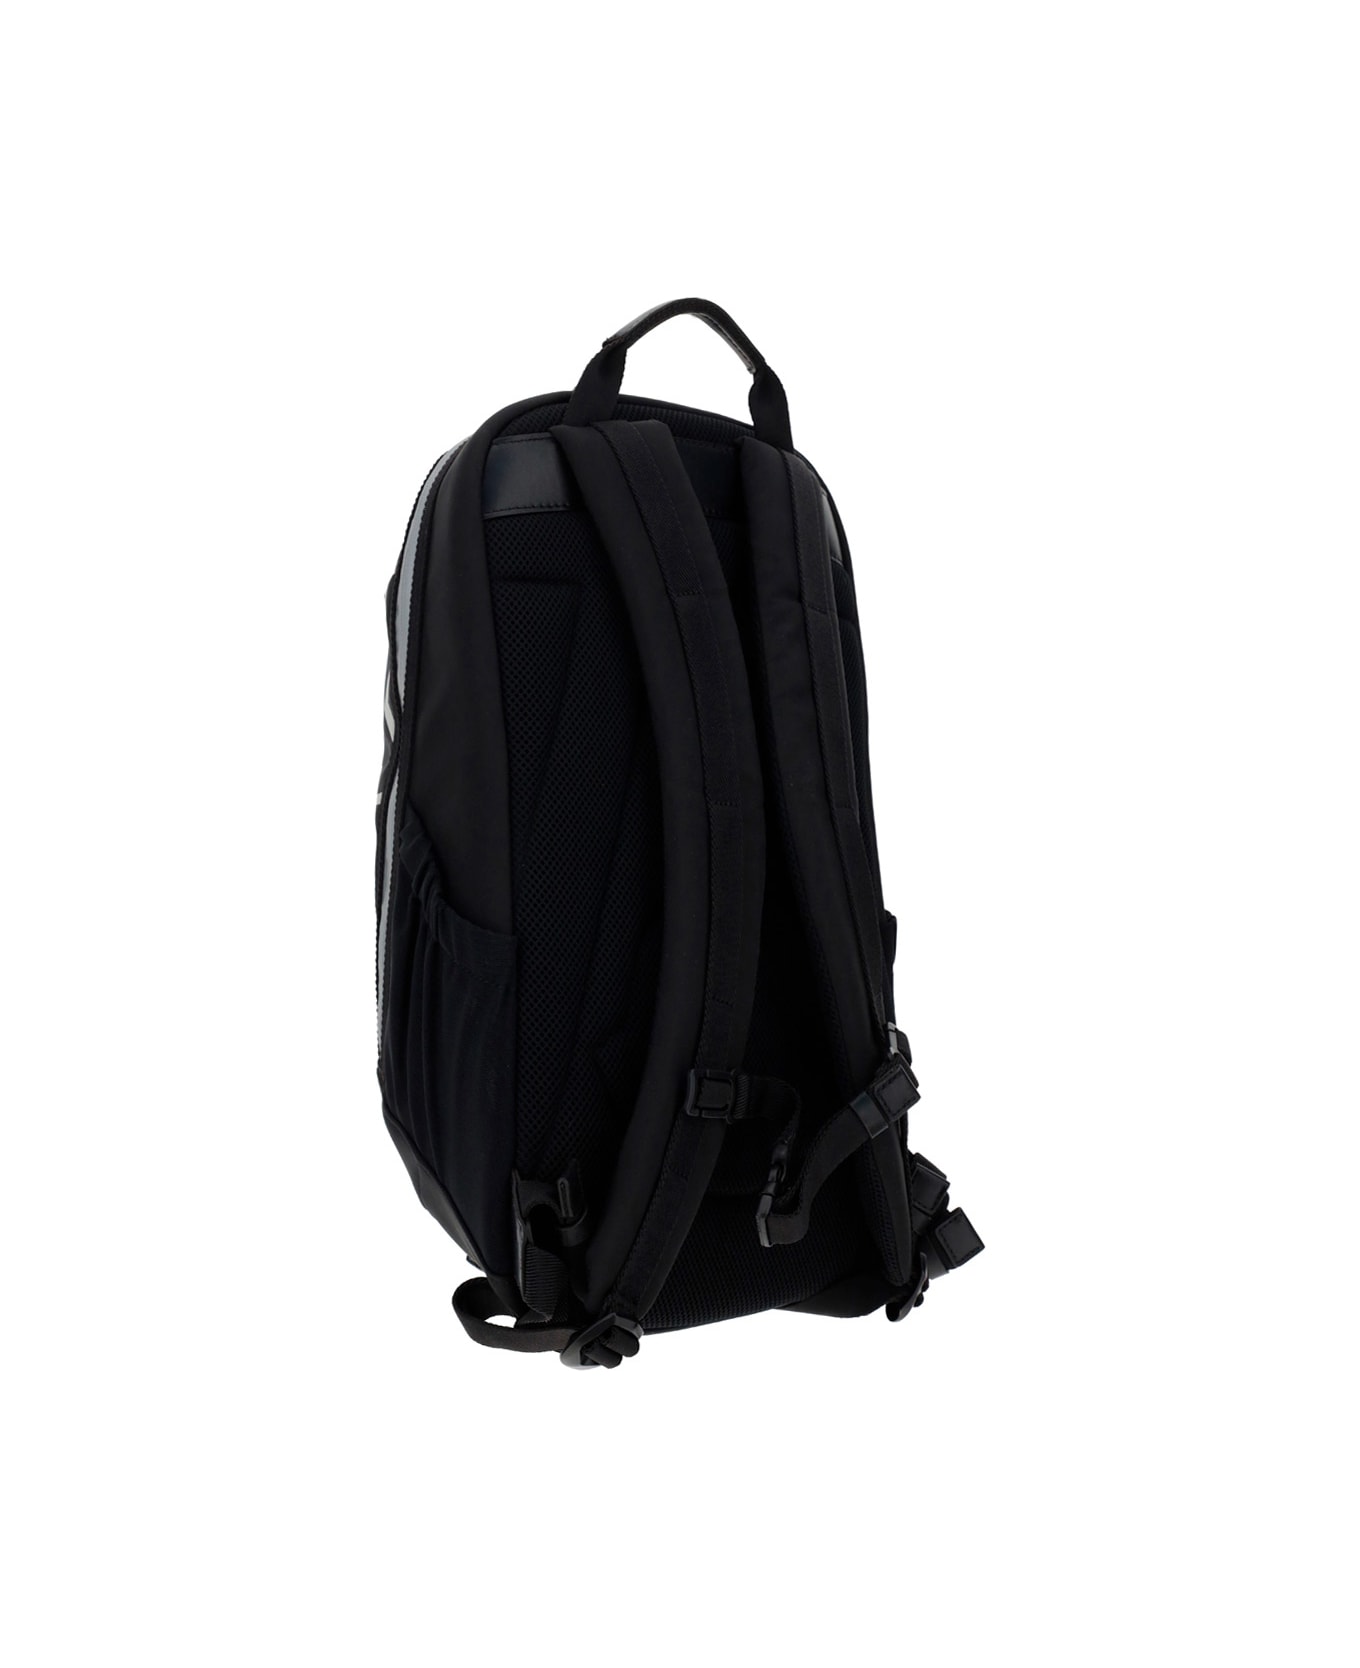 Moncler Cut Backpack - NERO